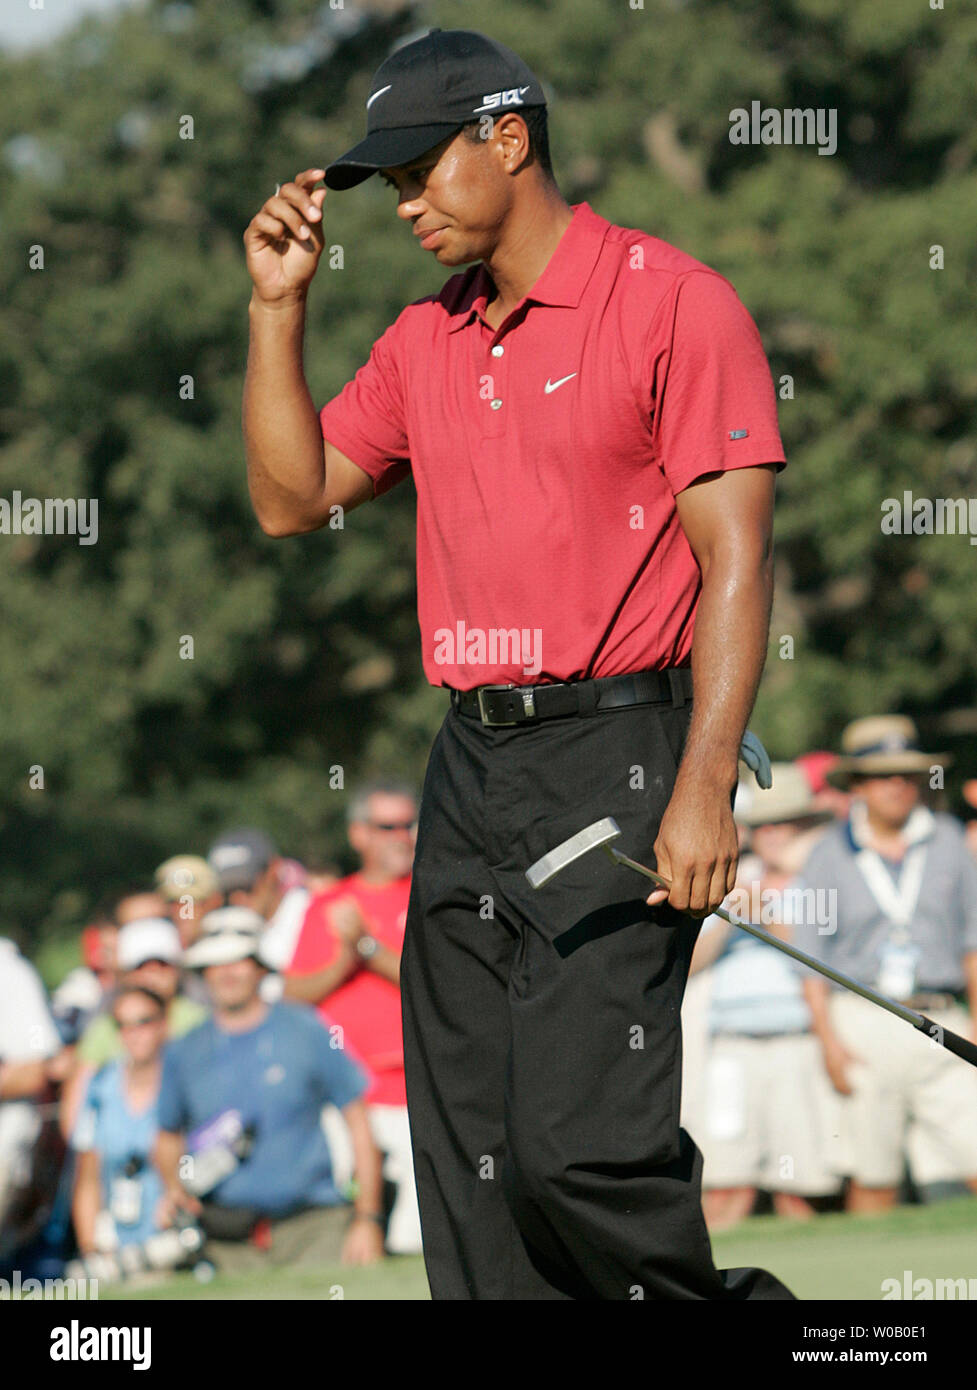 Tiger Woods tips his cap before making his final putt for victory on the eighteenth green during the final round of the 89th PGA Championship at Southern Hills Country Club in Tulsa, Oklahoma on August 12, 2007. Tiger Woods earned his 13th major winning the PGA with a eight under par 272.    (UPI Photo/Gary C. Caskey) Stock Photo